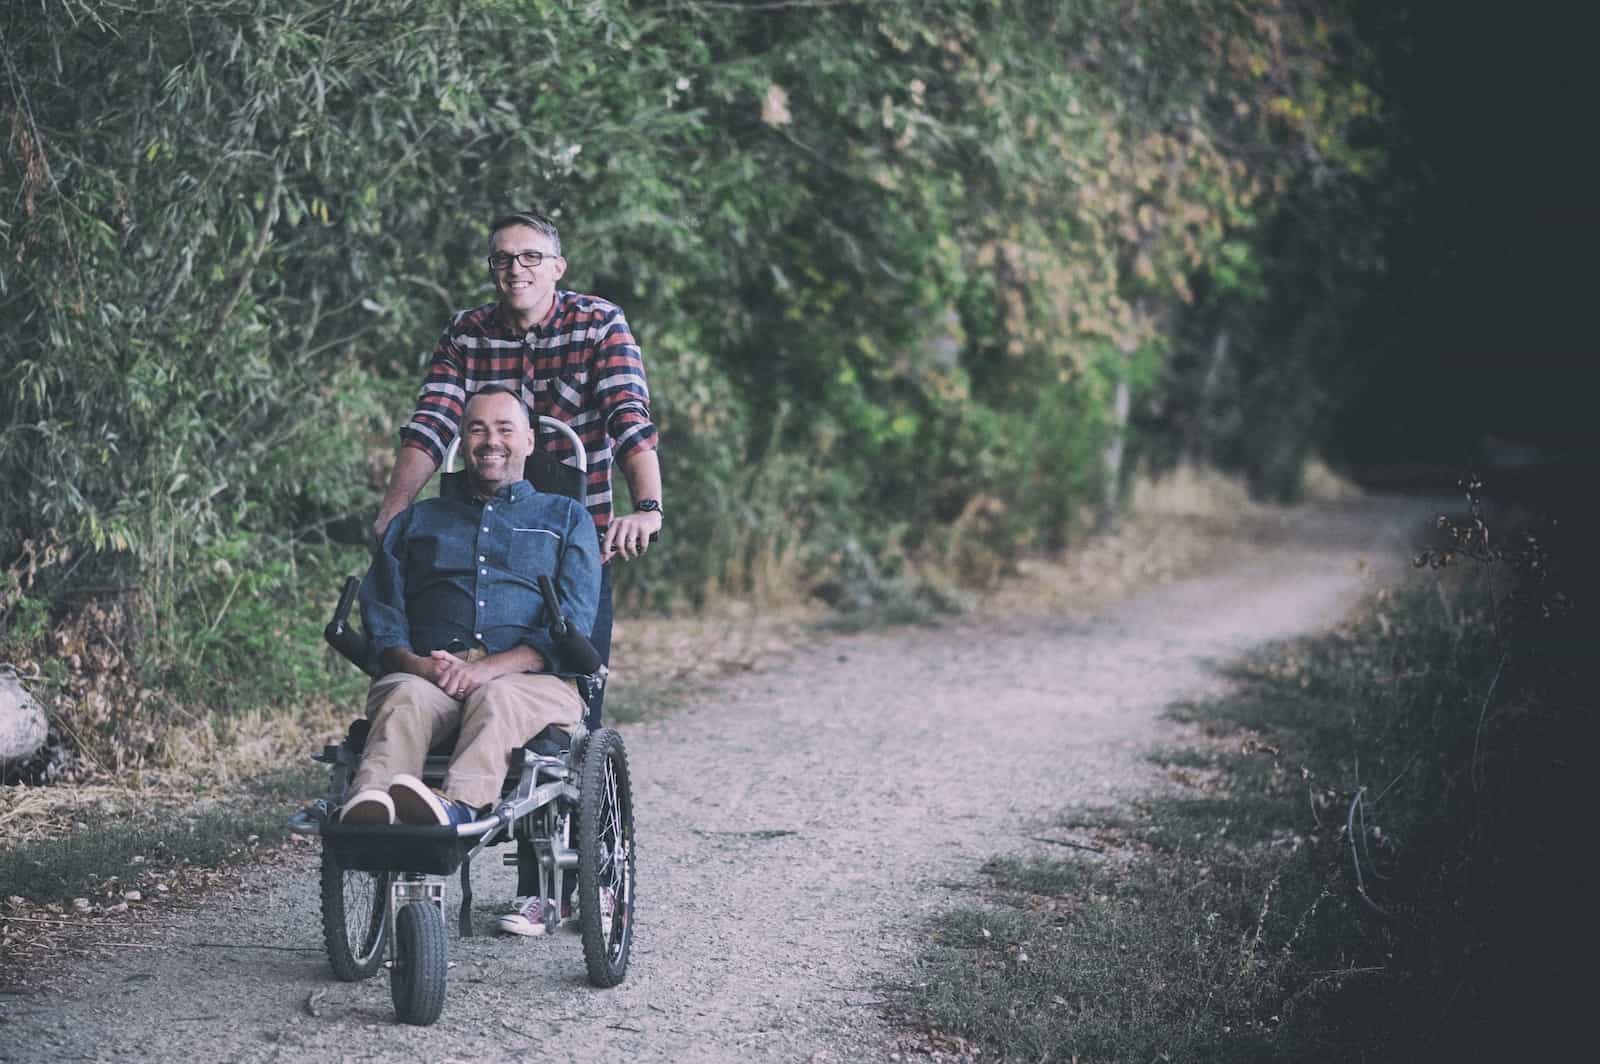 The authors of Imprints; one man stands behind another man sitting in a wheelchair on a dirt path.